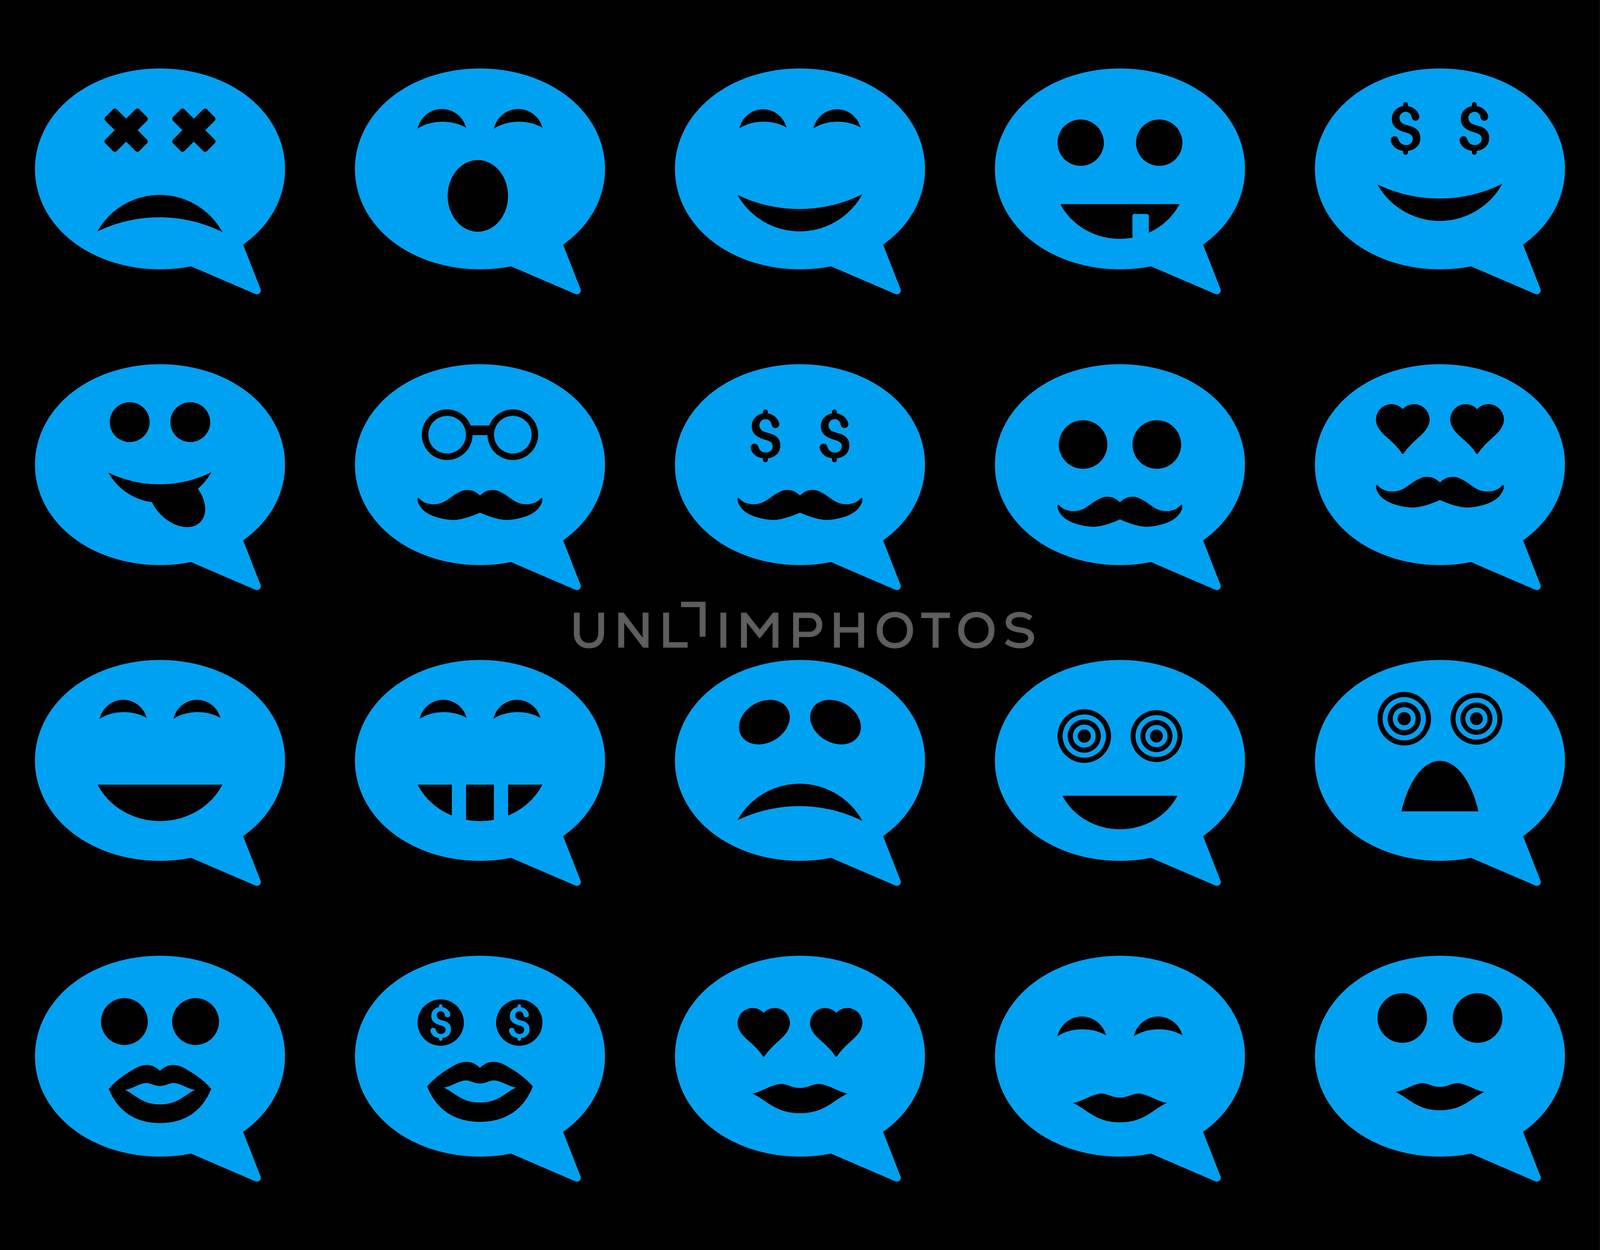 Chat emotion smile icons. Glyph set style is flat images, blue symbols, isolated on a black background.